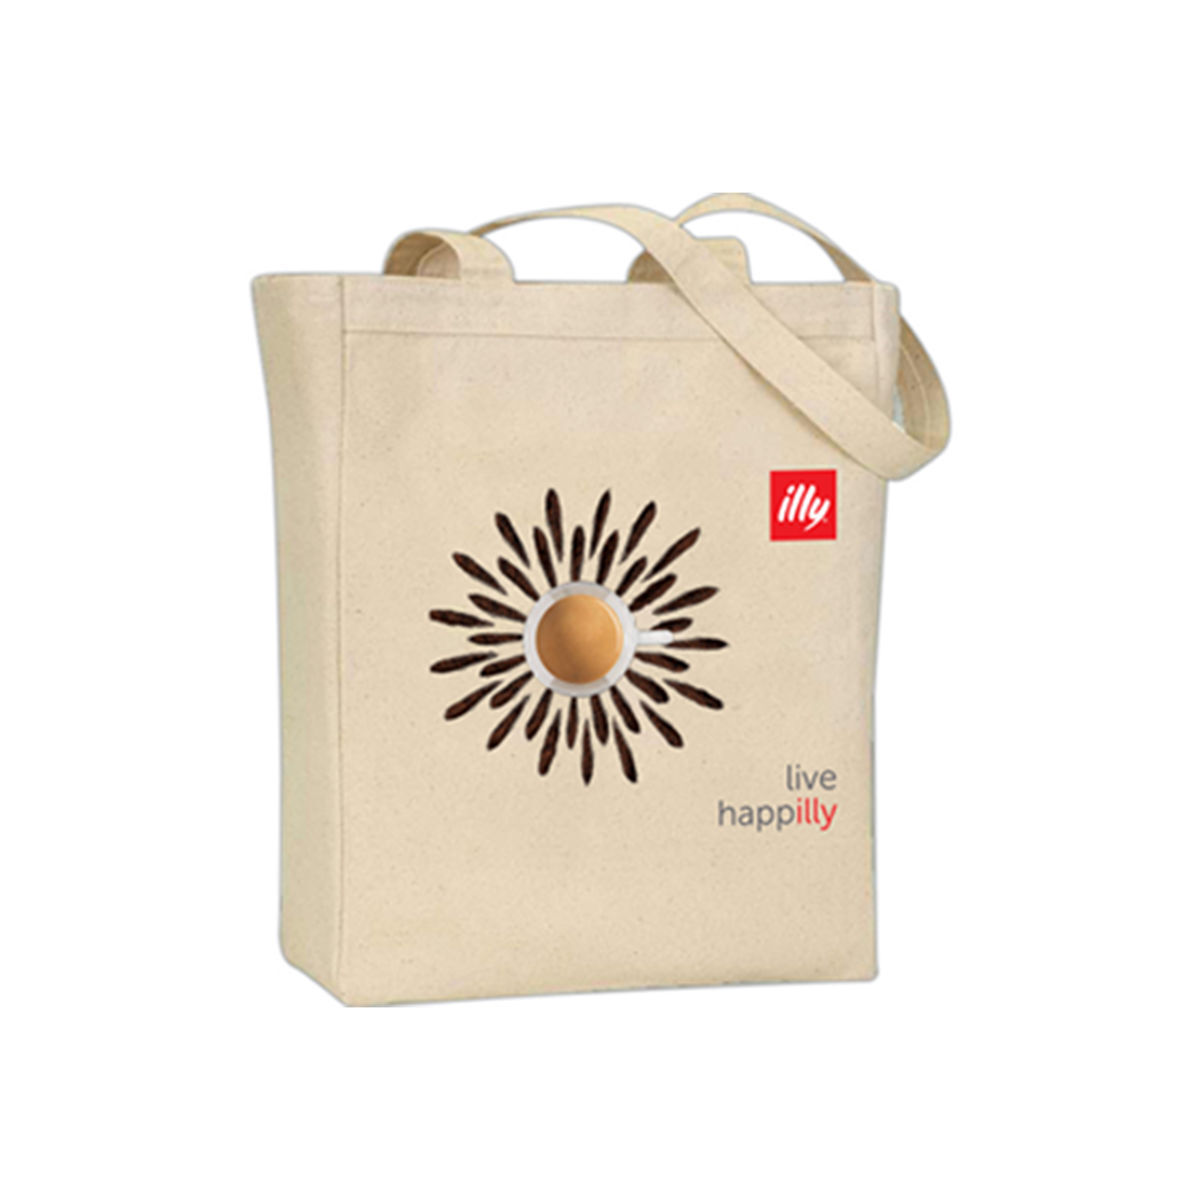 illy Branded Tote Bag